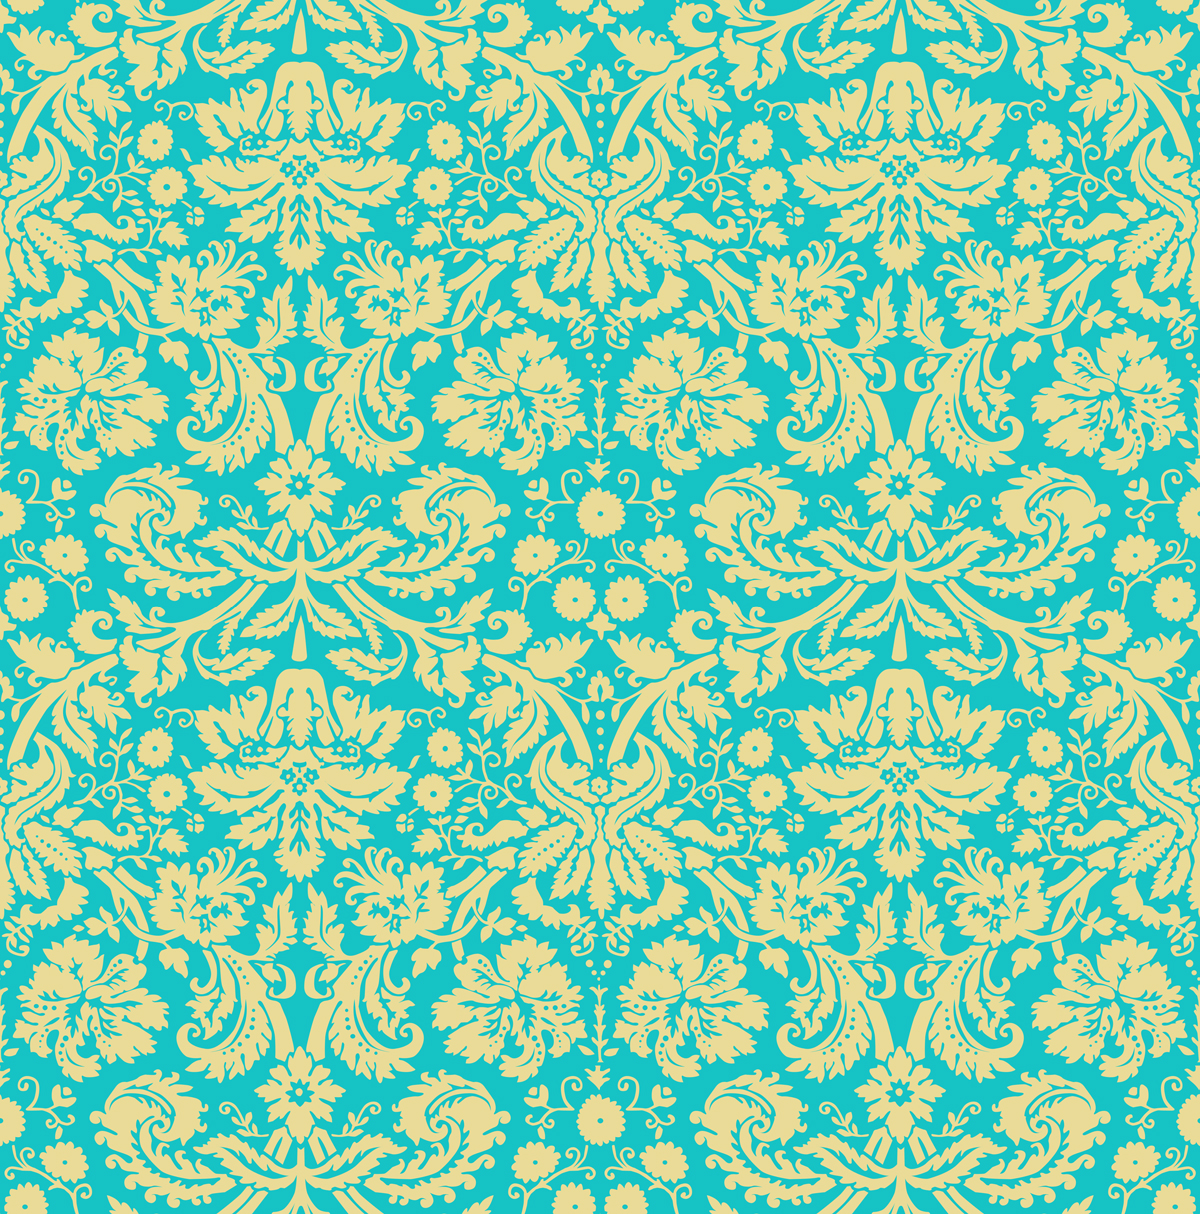 damask wallpaper 2 by insurrectionx on